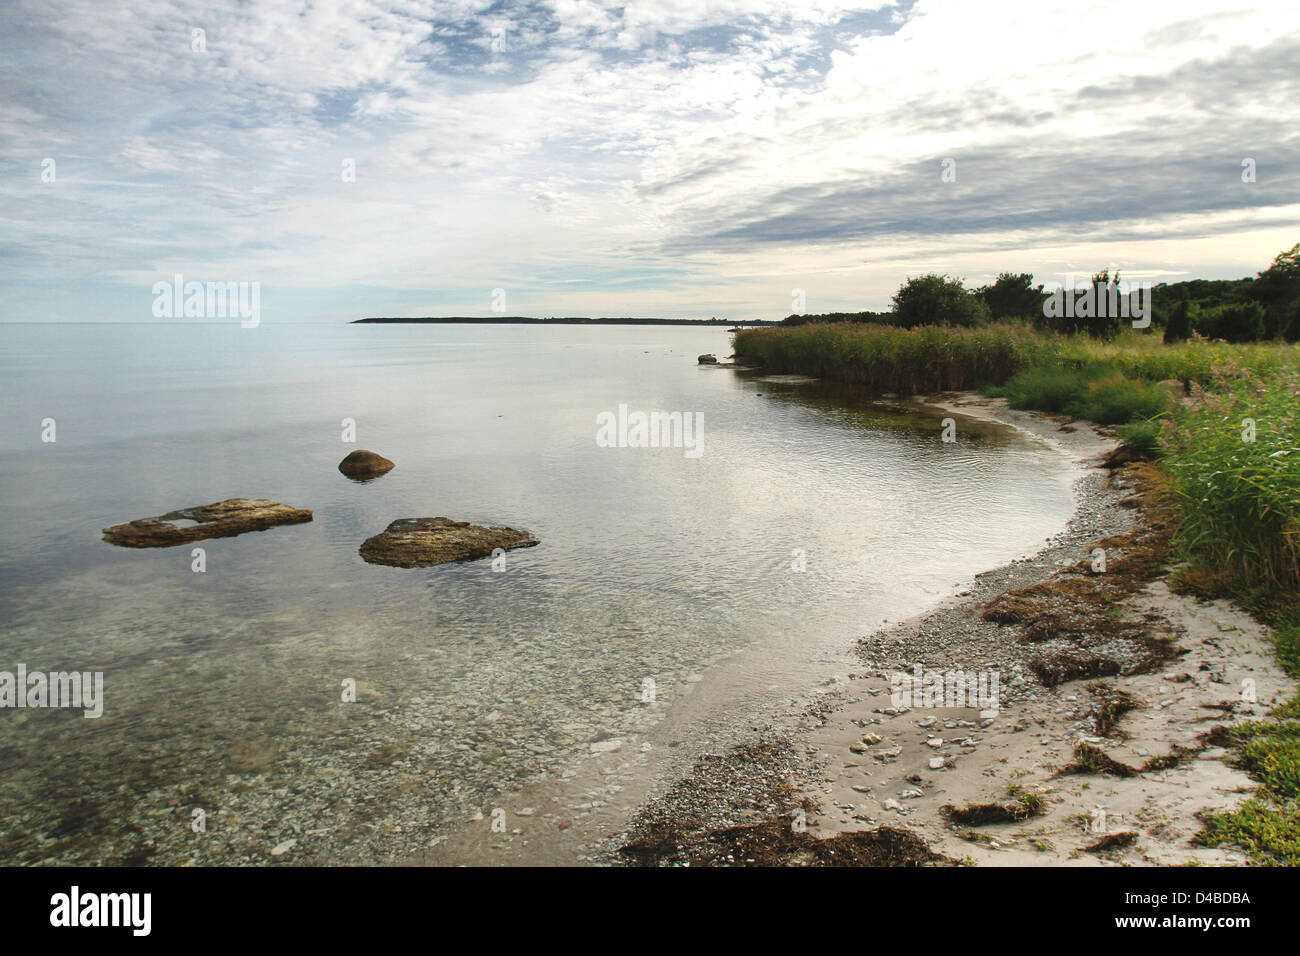 Travel images Gotland and Faro Islands, Sweden. Timeless place in Faro Island. Stock Photo